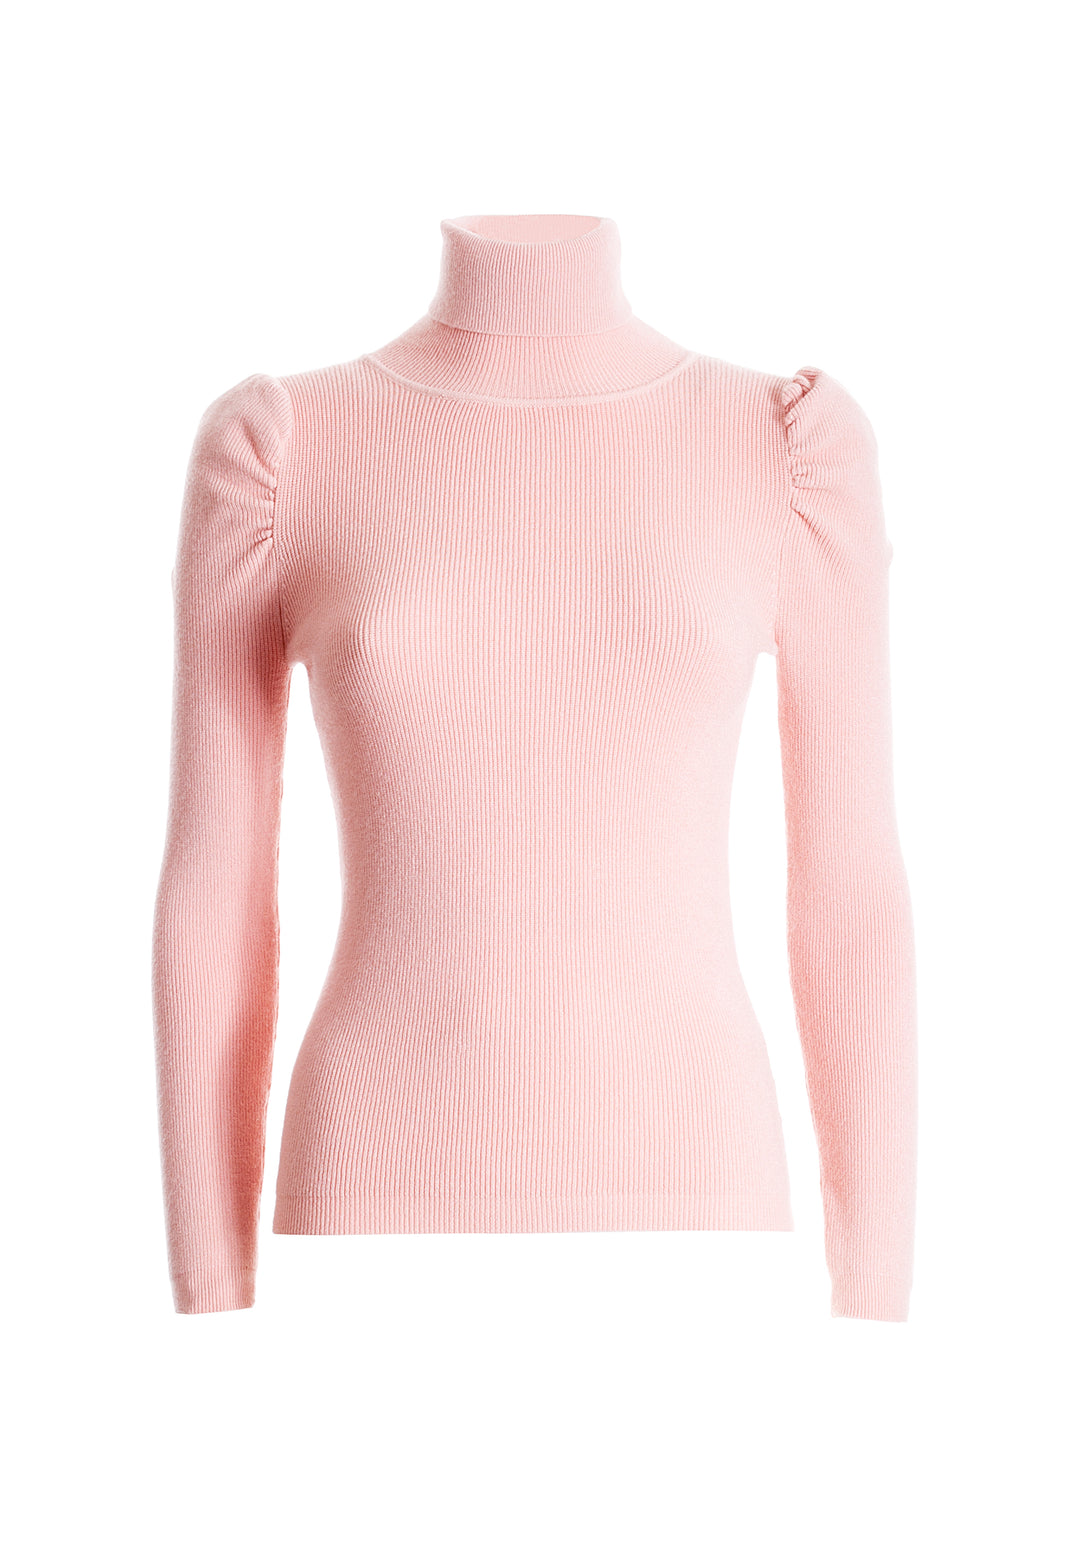 Knitwear slim fit with ribs and high neck